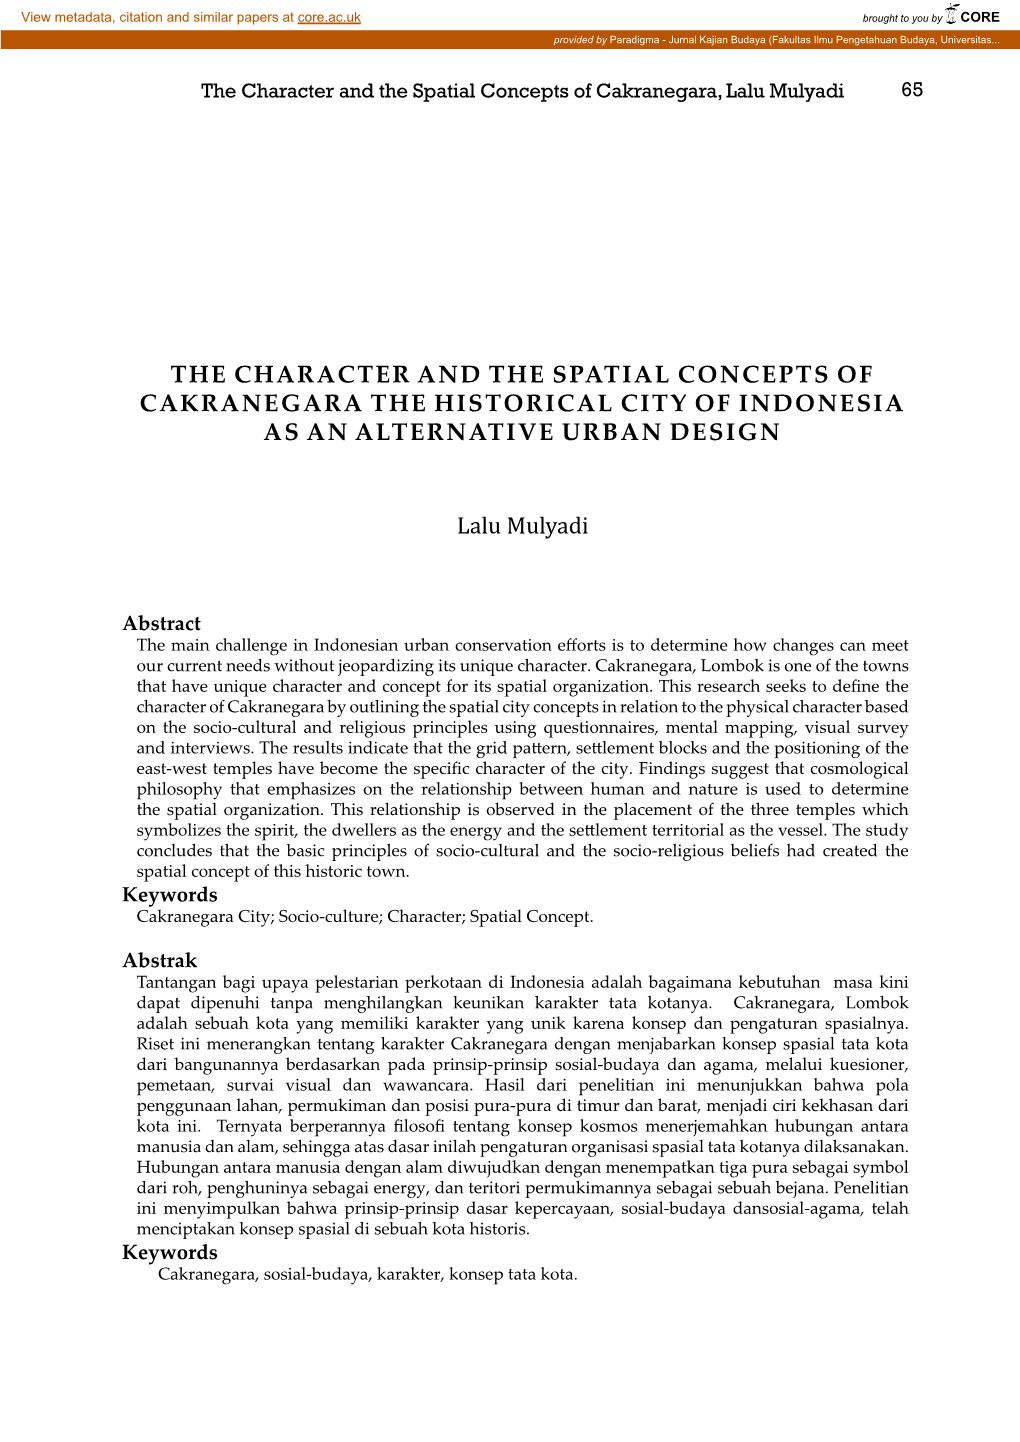 The Character and the Spatial Concepts of Cakranegara the Historical City of Indonesia As an Alternative Urban Design